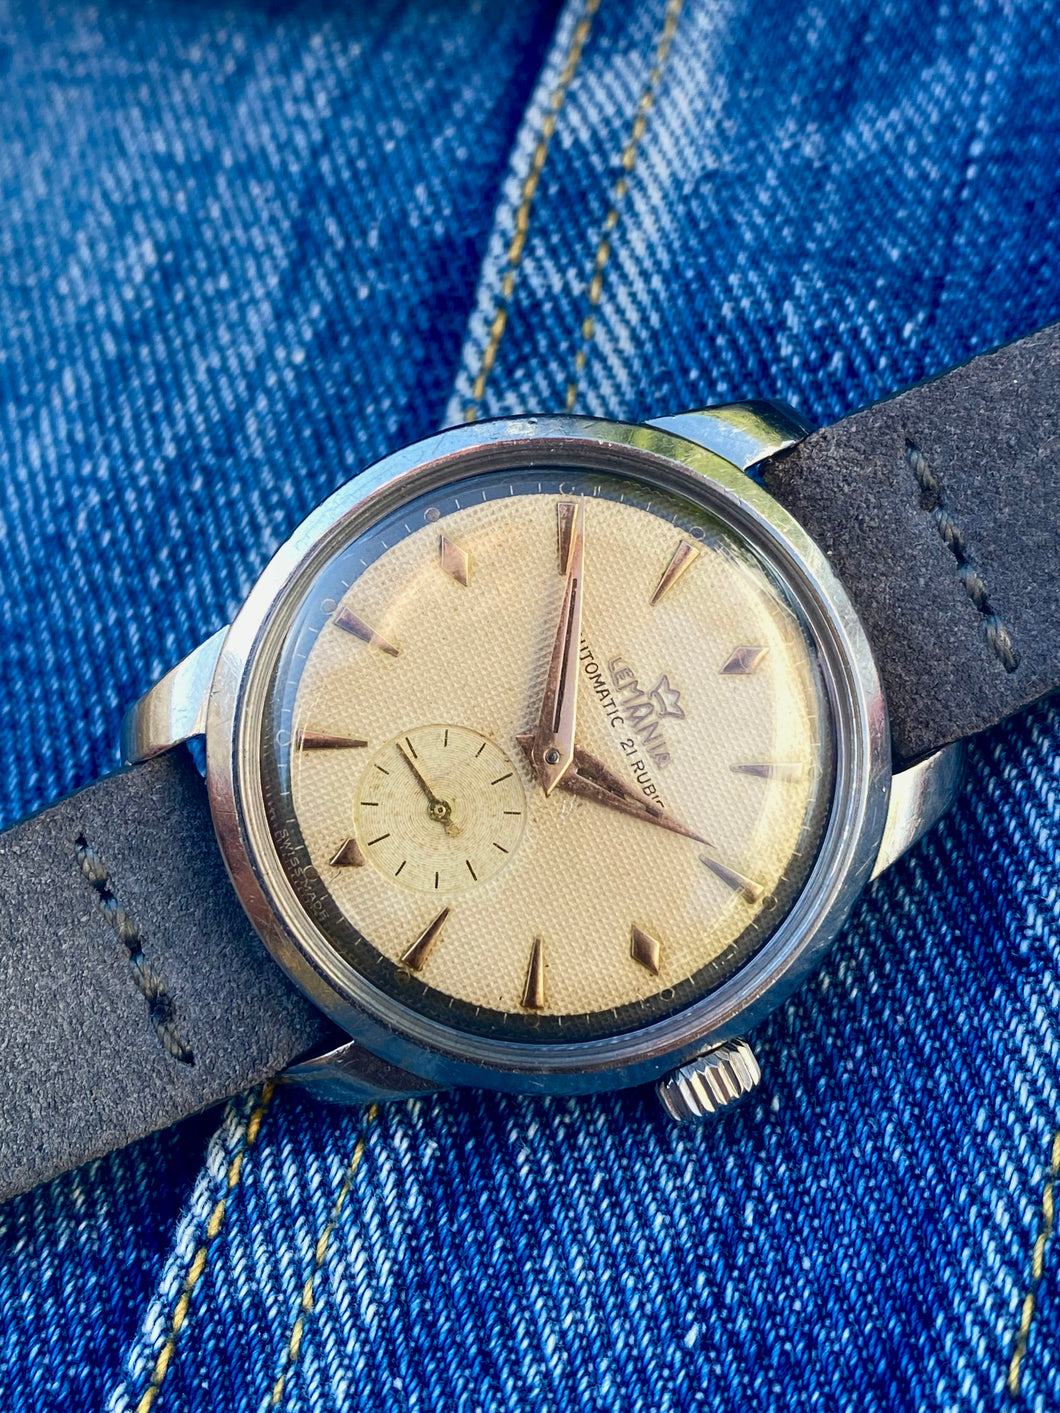 1953/54 Lemania automatic with 